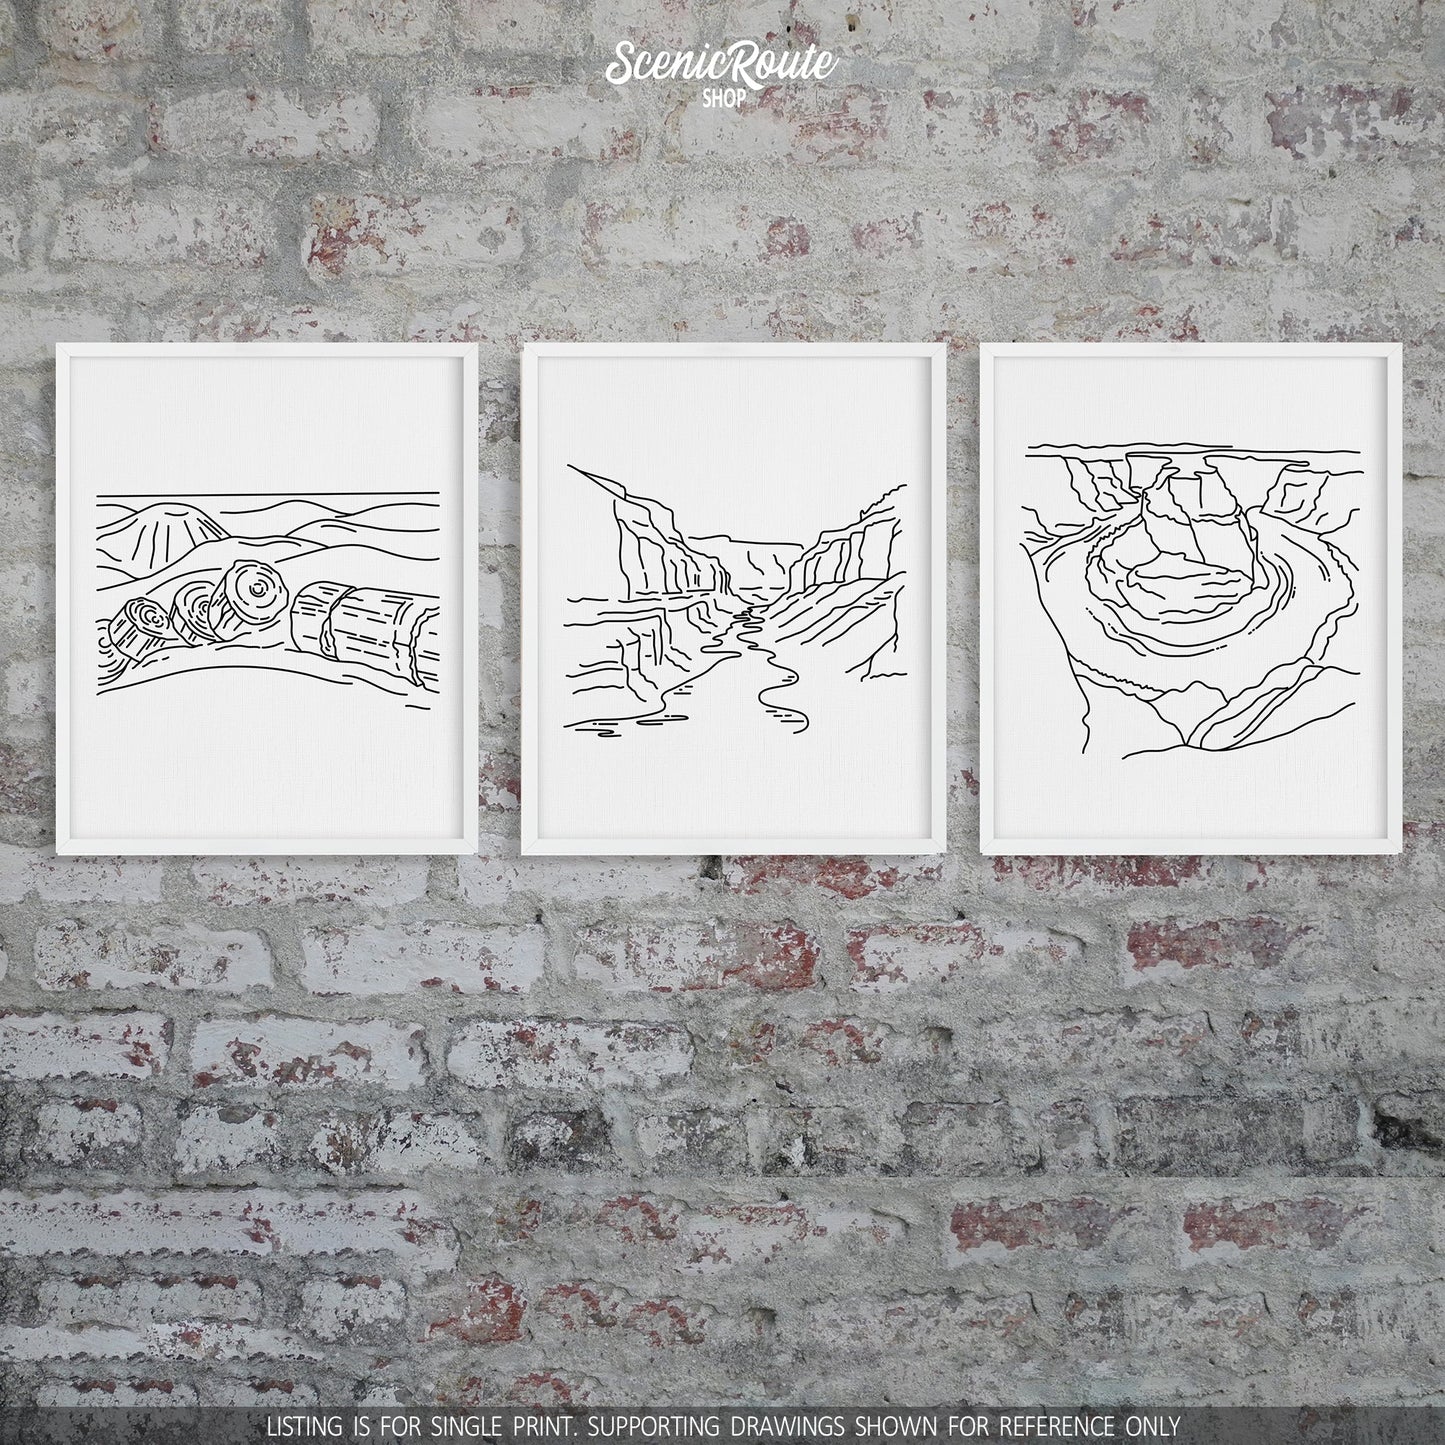 A group of three framed drawings on a brick wall. The line art drawings include Petrified Forest National Park, Grand Canyon National Park, and Horseshoe Bend